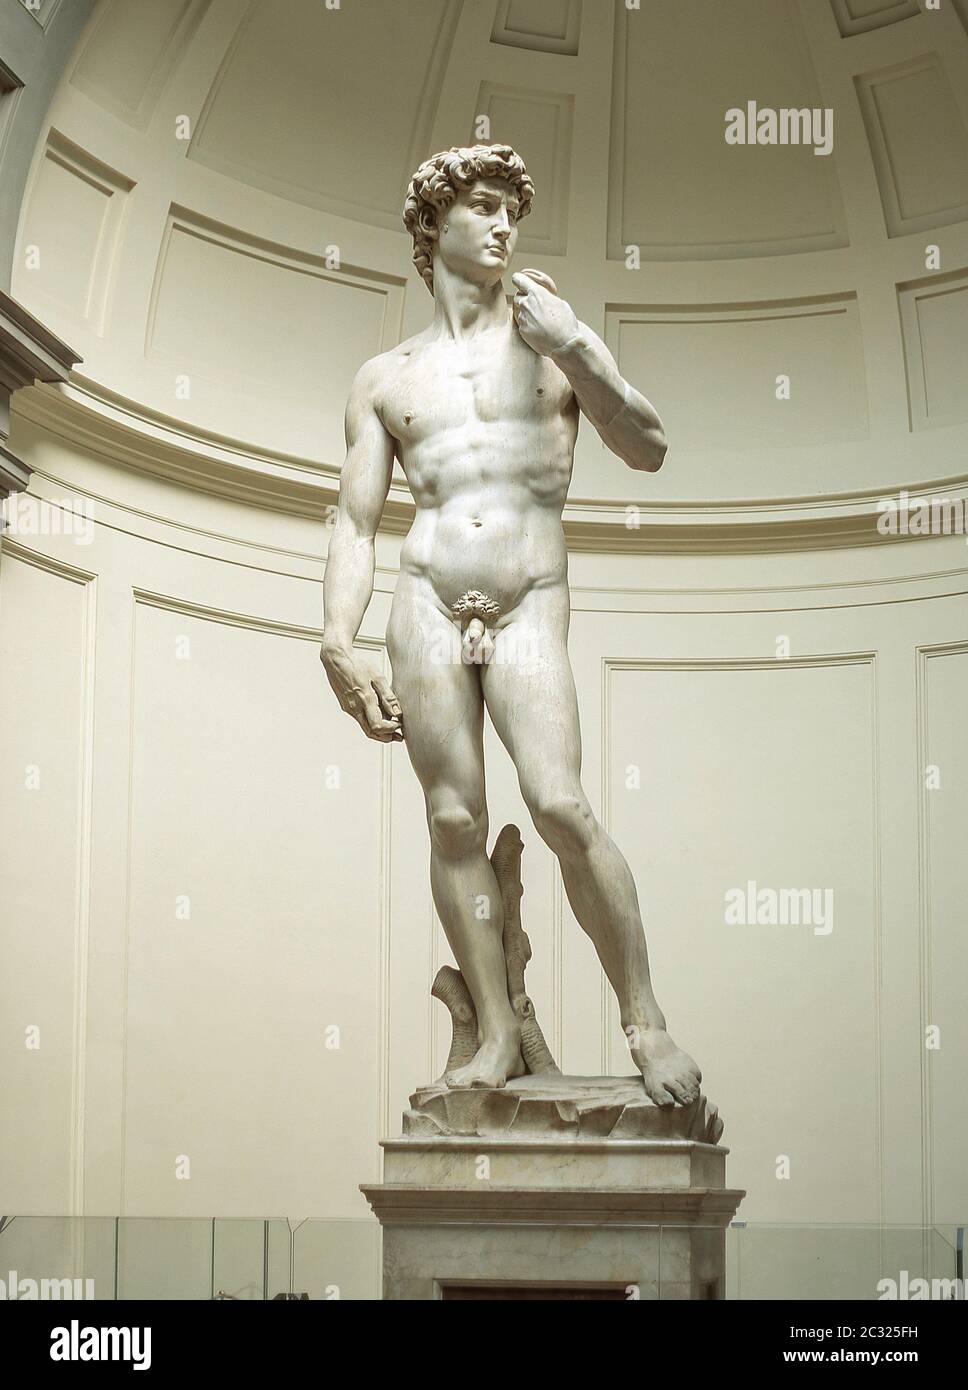 The 'Statue of David' by Michelangelo, Accademia di Belle Arti, Florence (Firenze), Tuscany Region, Italy Stock Photo